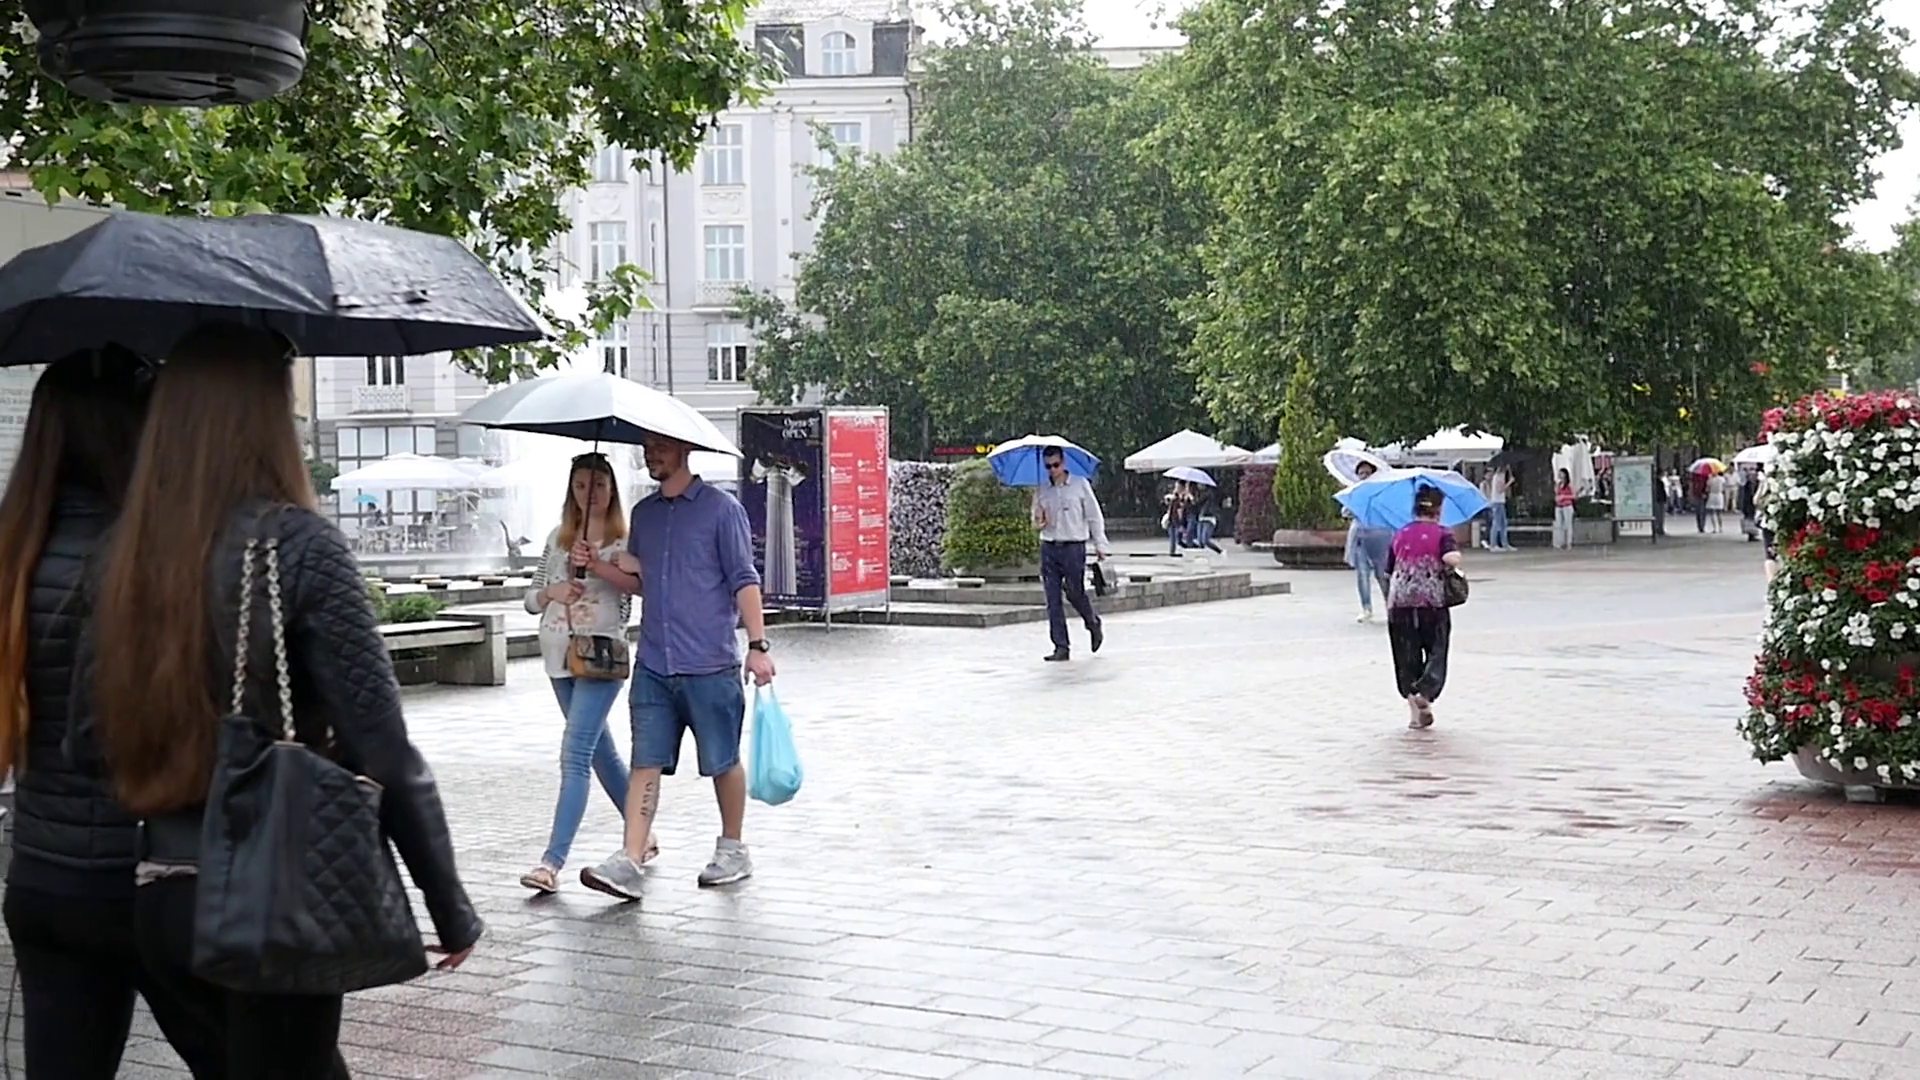 Young people walk under umbrellas in the rain walking down the ...